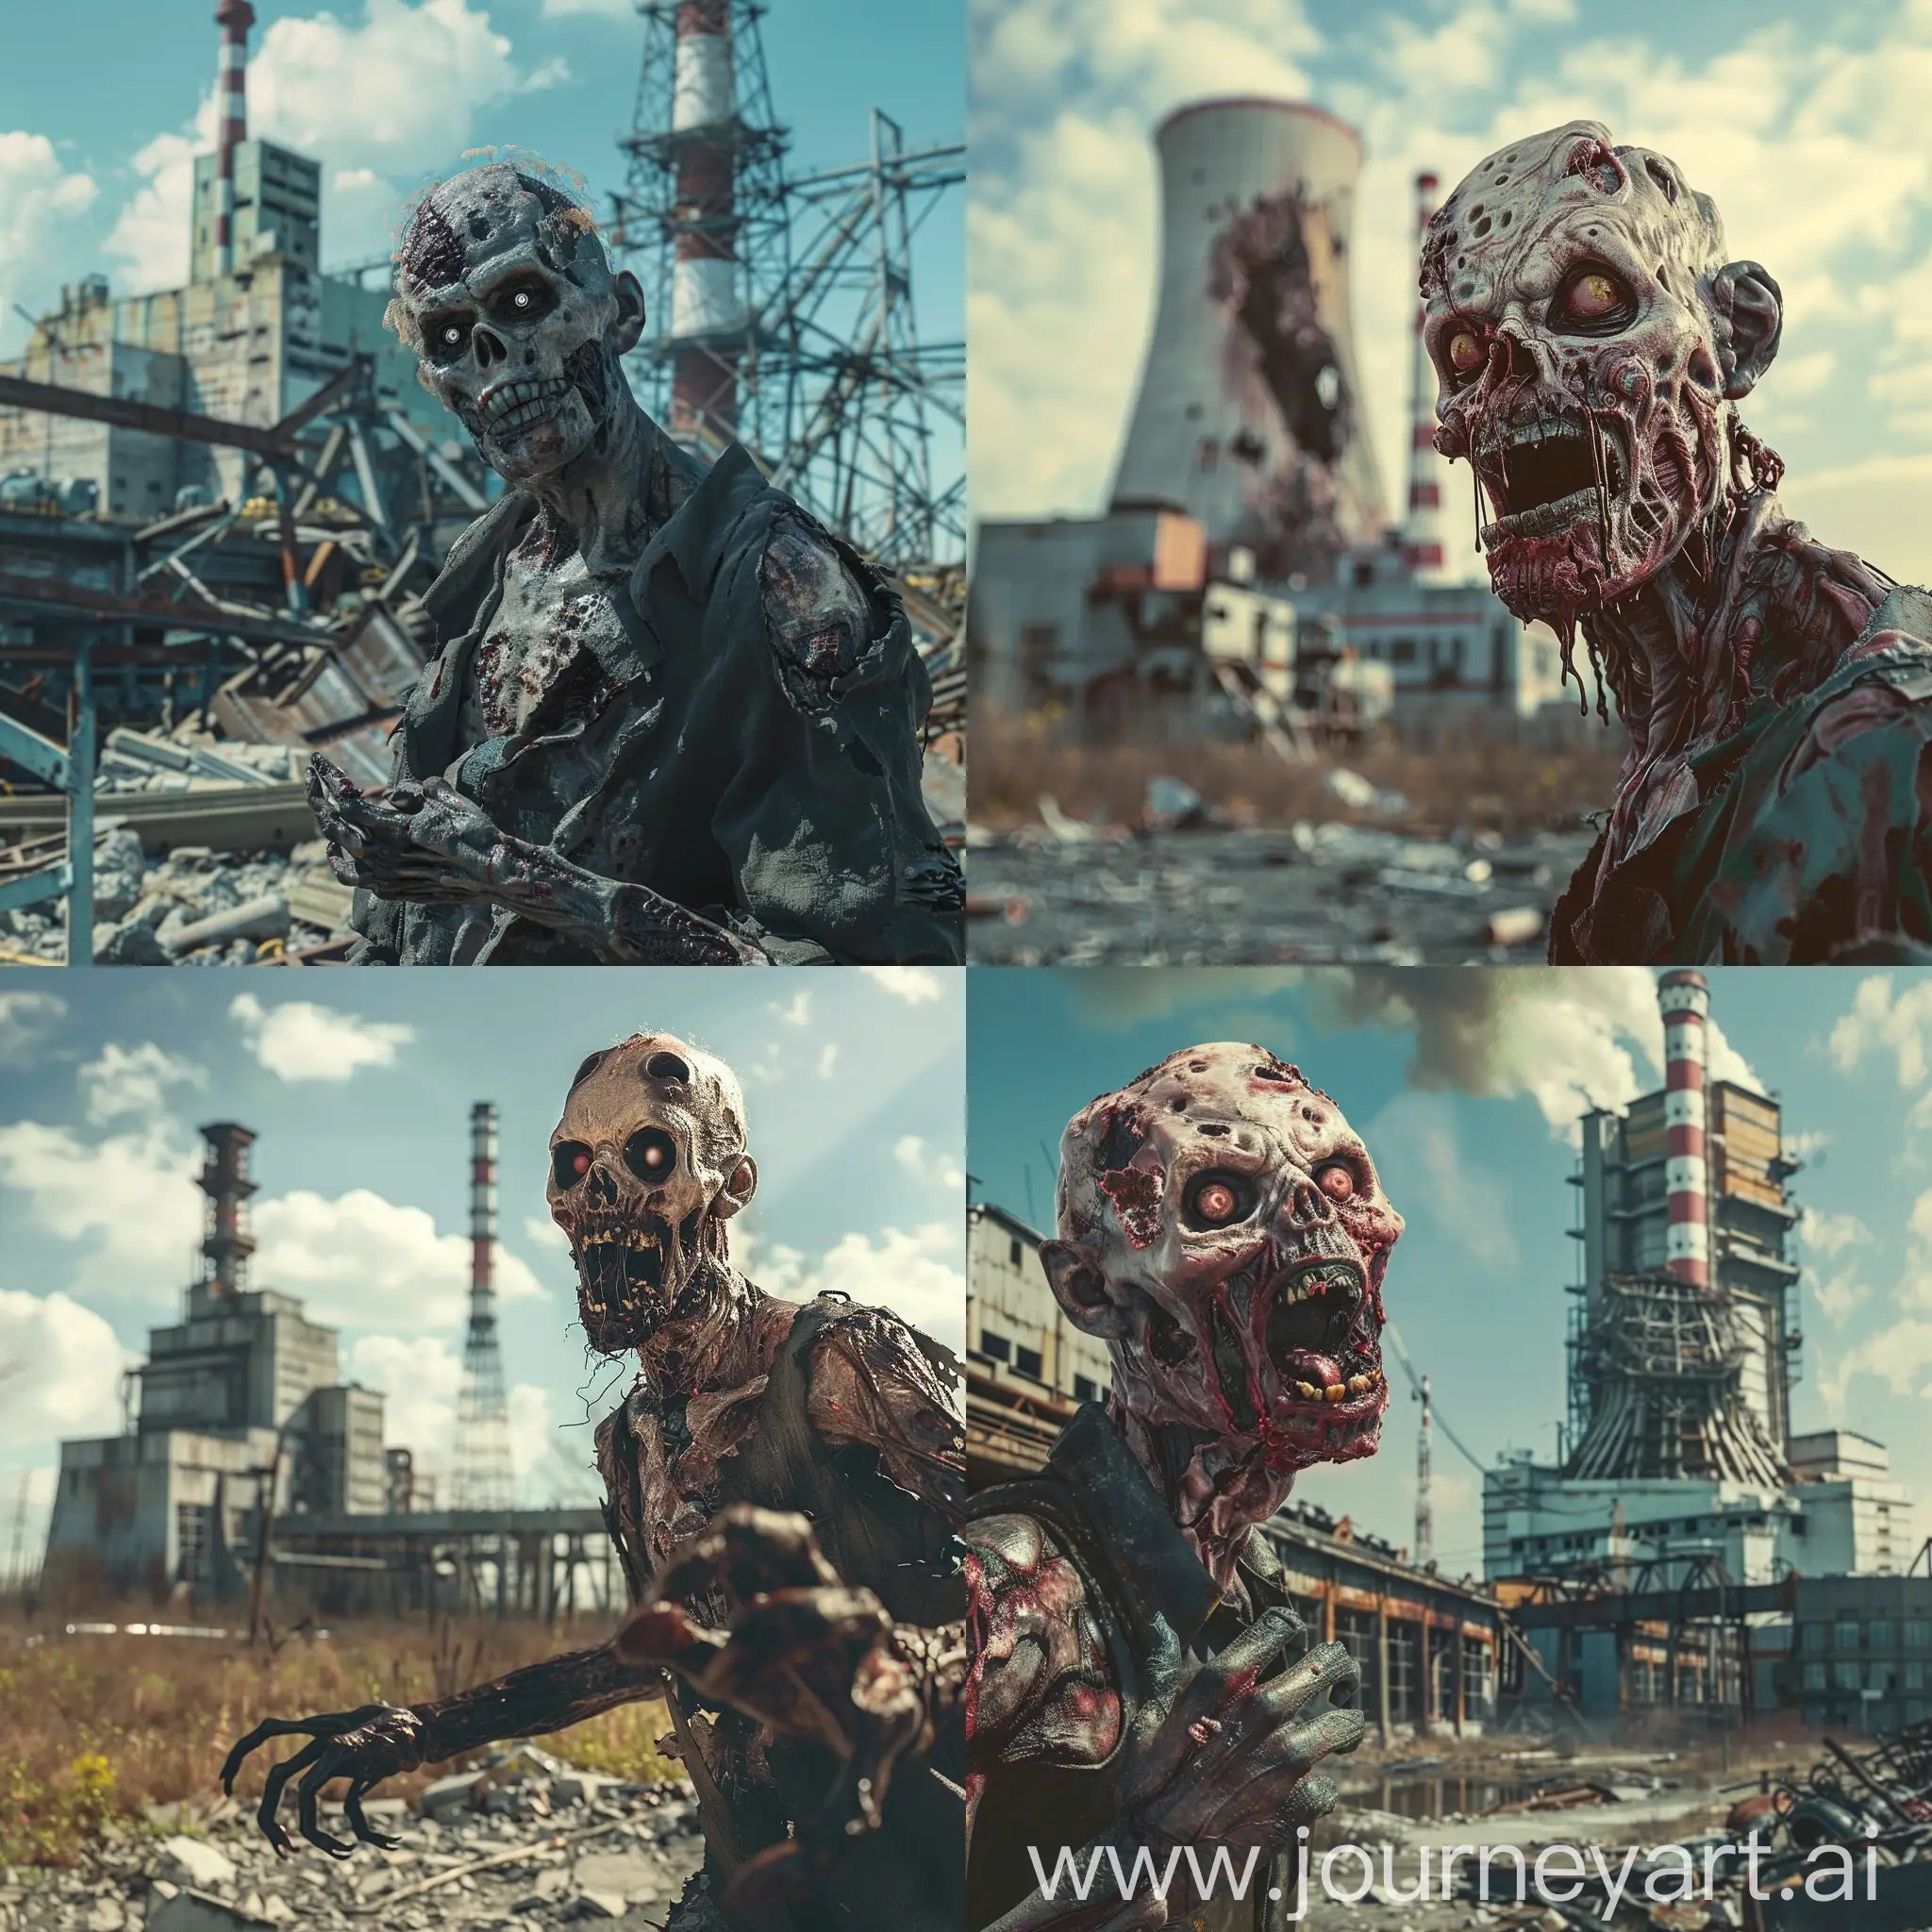 Radioactive-Zombie-Amidst-Ruins-of-Nuclear-Power-Plant